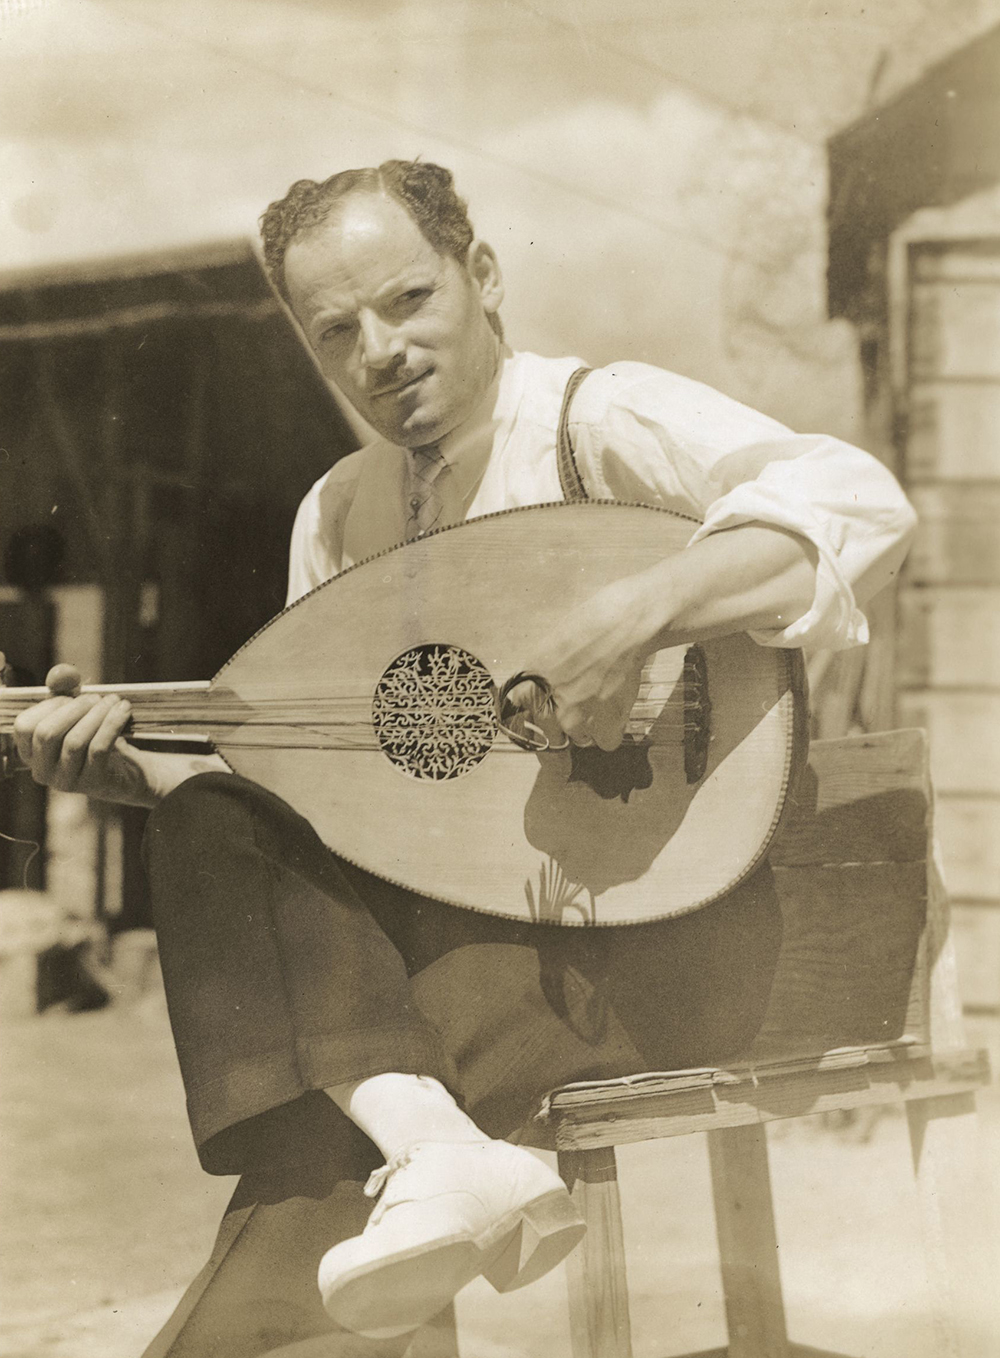 A seated man plays an oud outdoors.